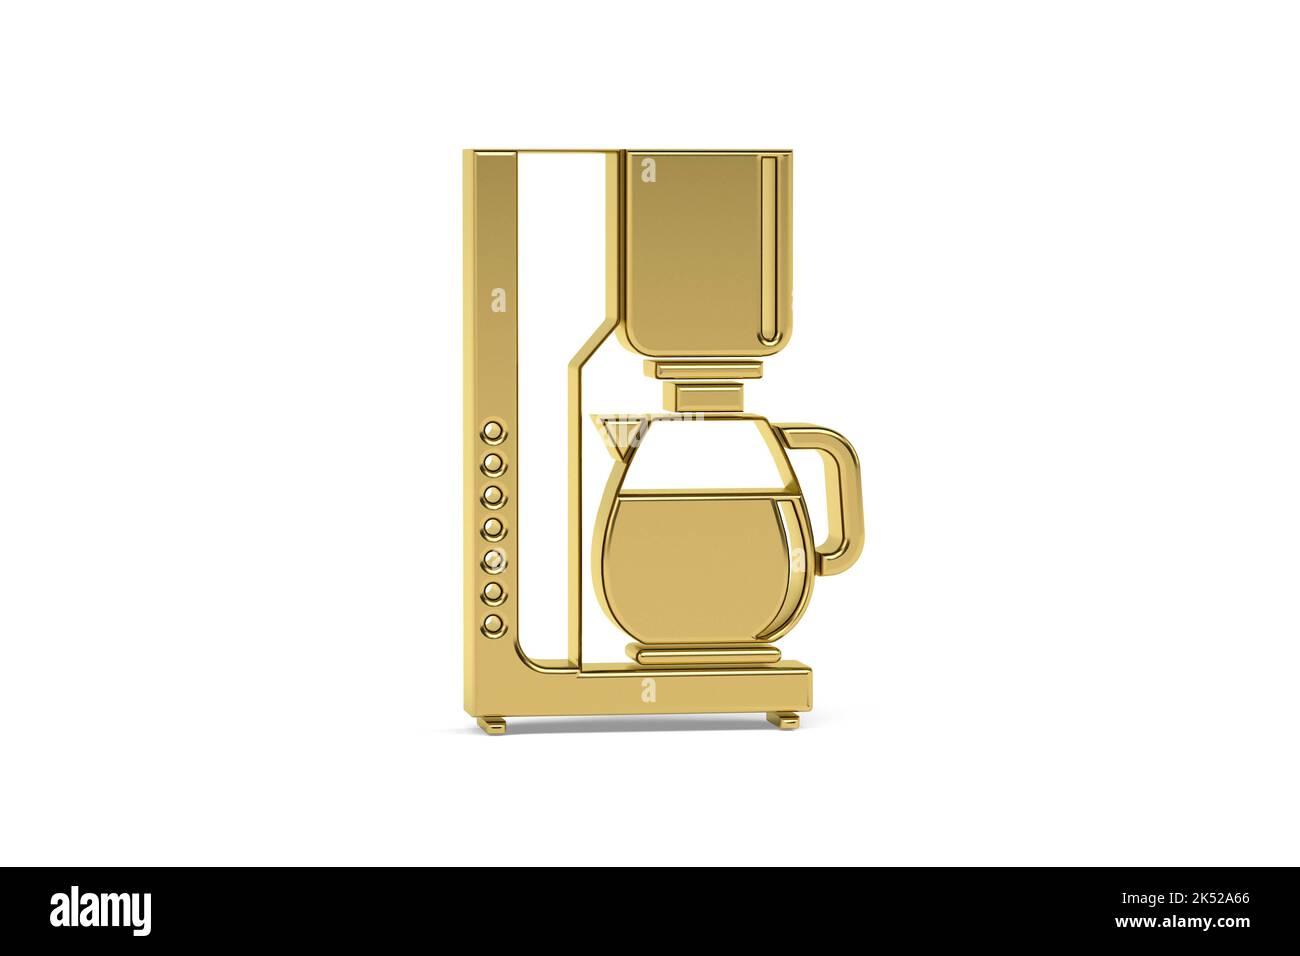 Modern Yellow Coffee Machine With A Kettle For Brewing Coffee 3d Rendering  On Gray Background With Shadow Stock Photo, Picture and Royalty Free Image.  Image 102794149.